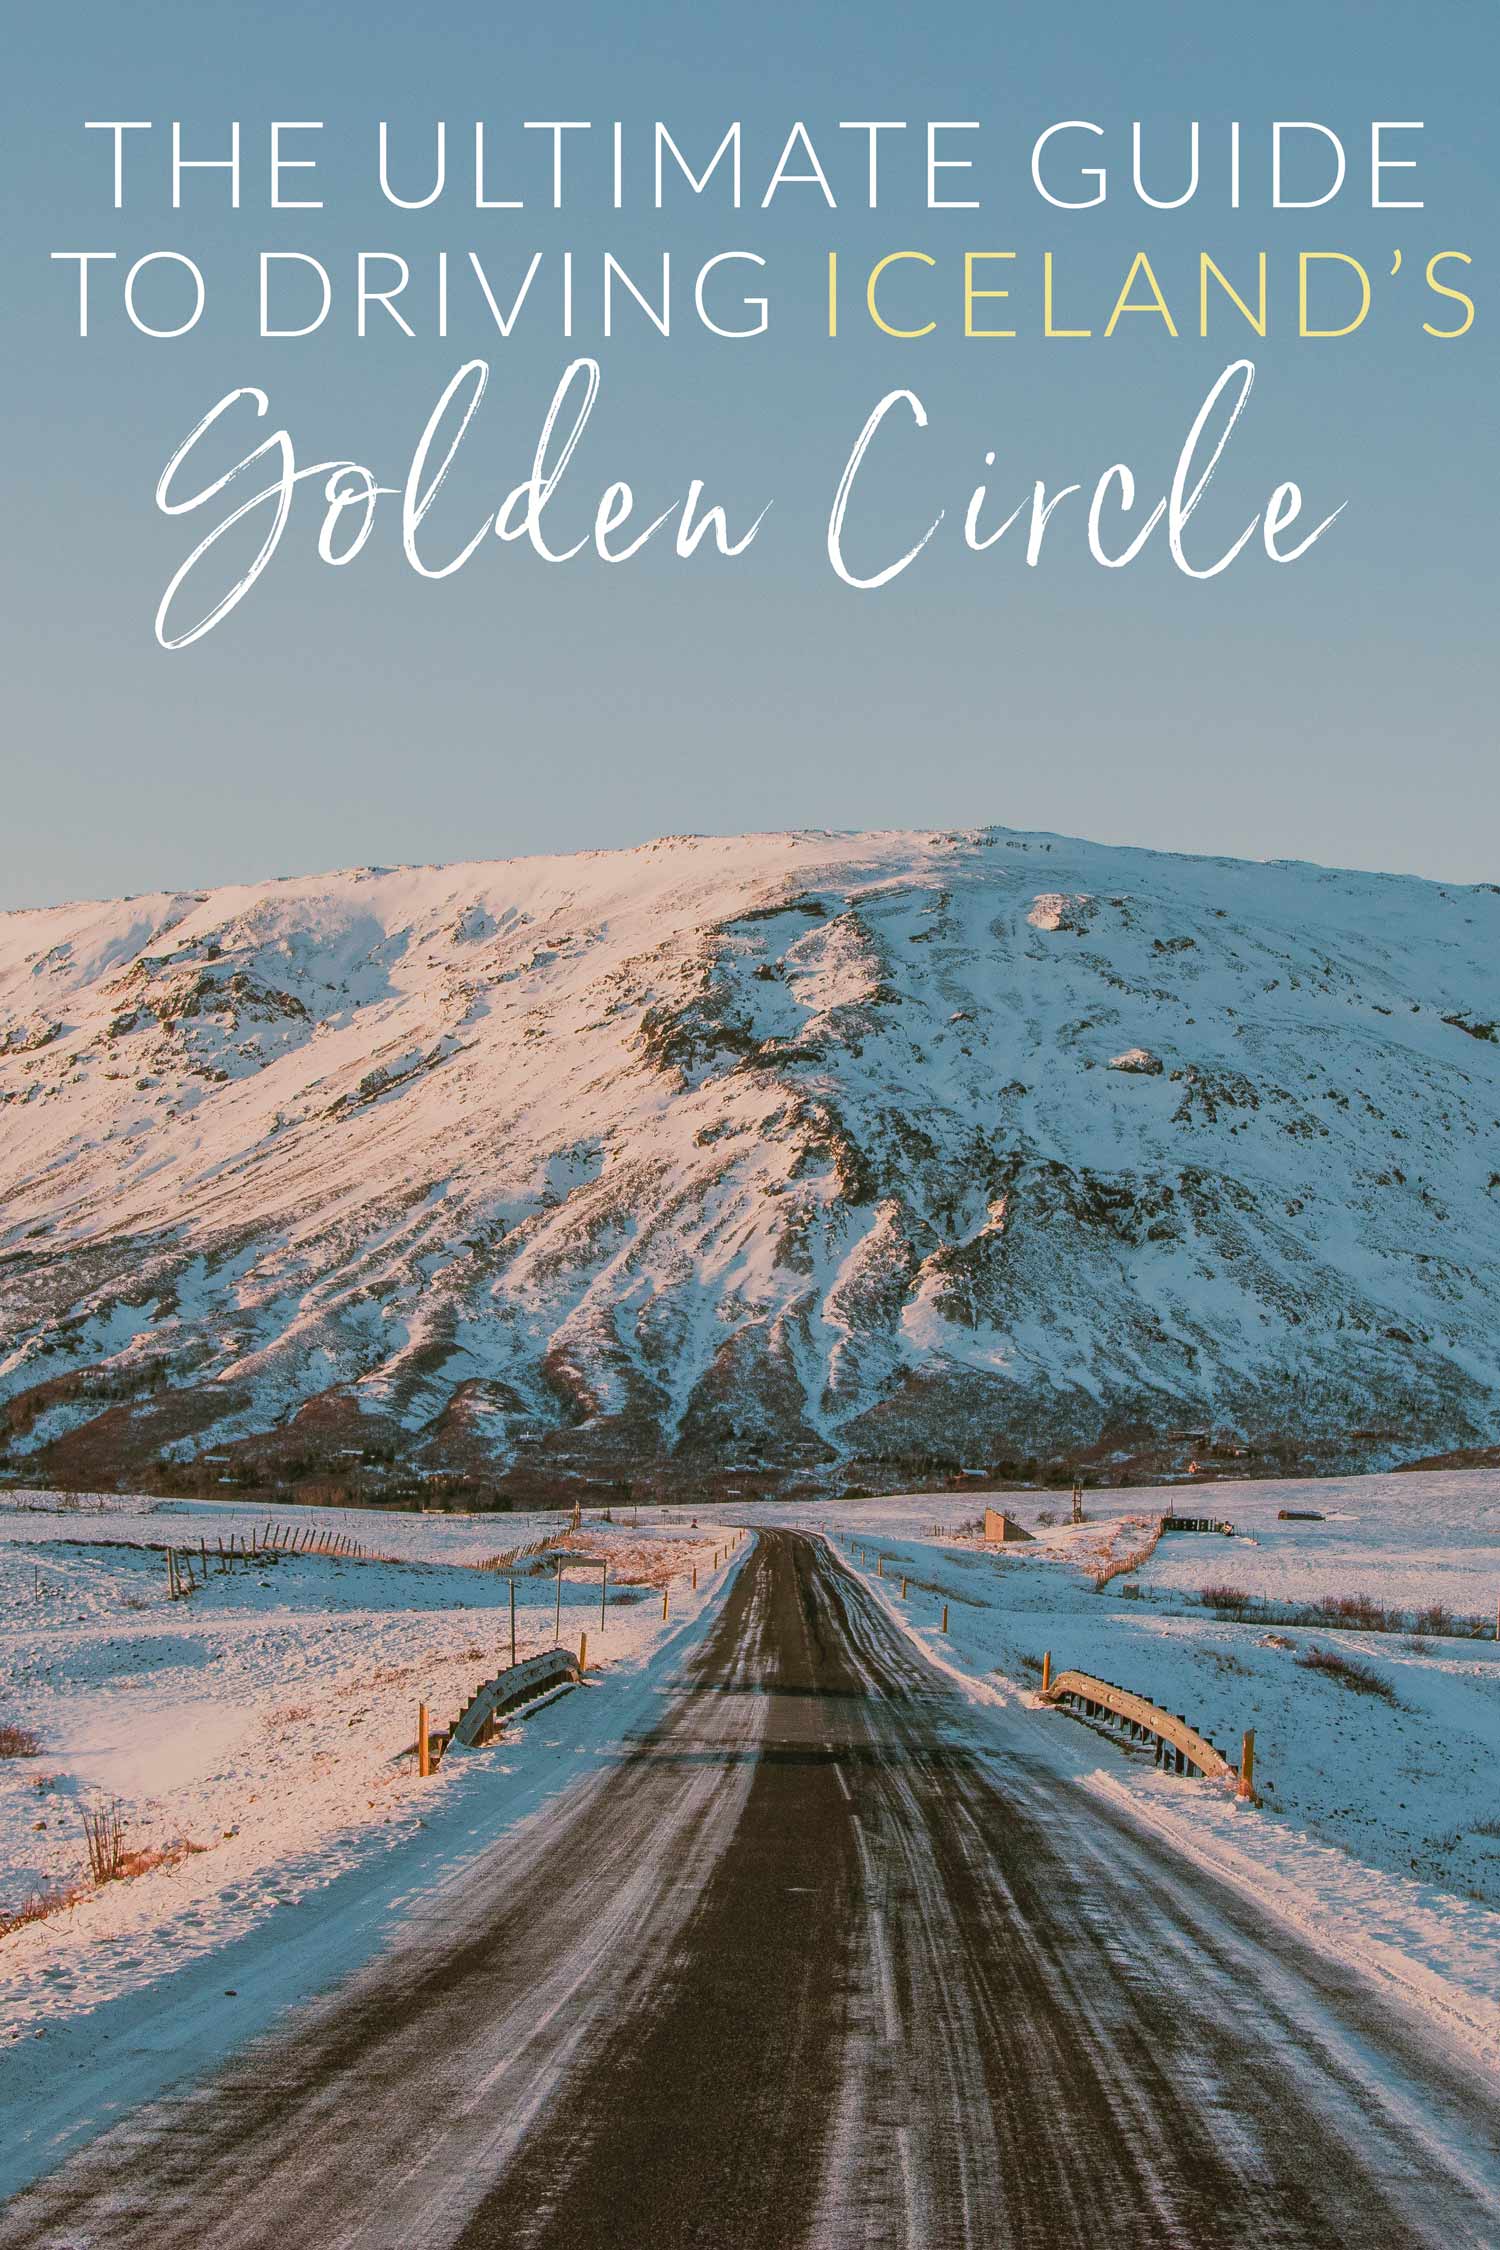 The Ultimate Guide to Driving Iceland's Golden Circle